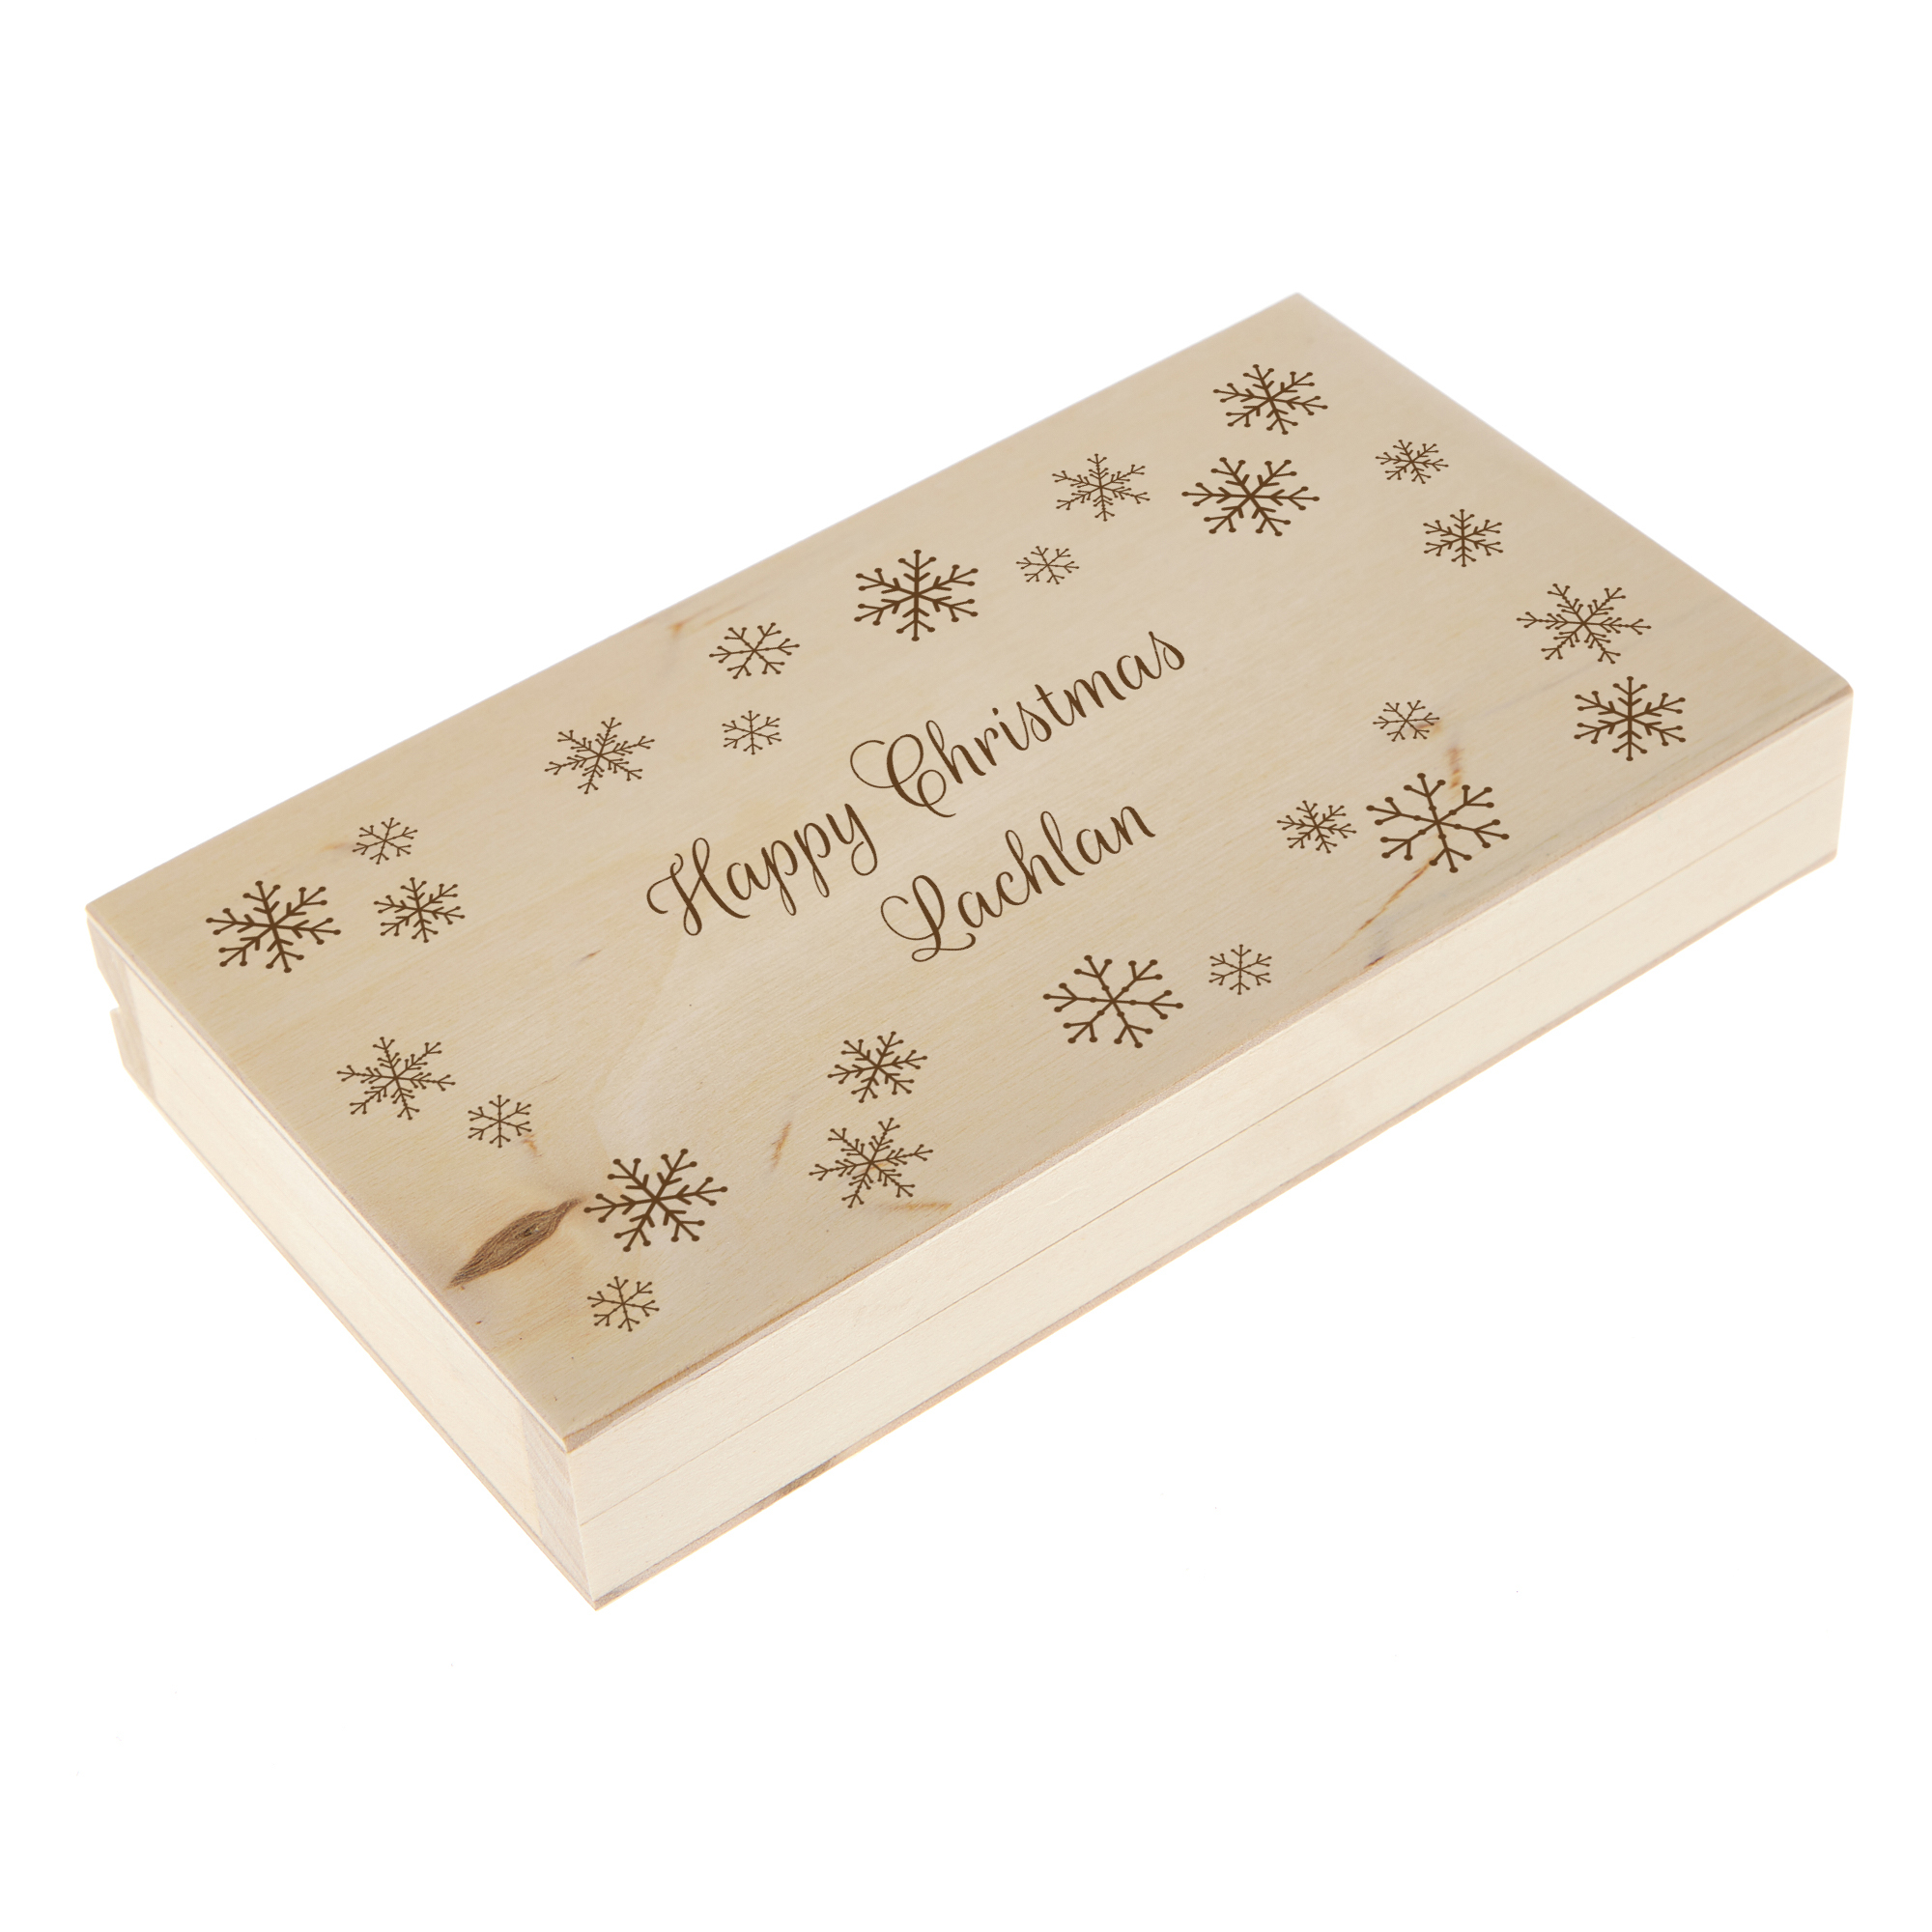 Personalised Engraved Money, Ticket or Gift Card Holder - Christmas Snowflakes